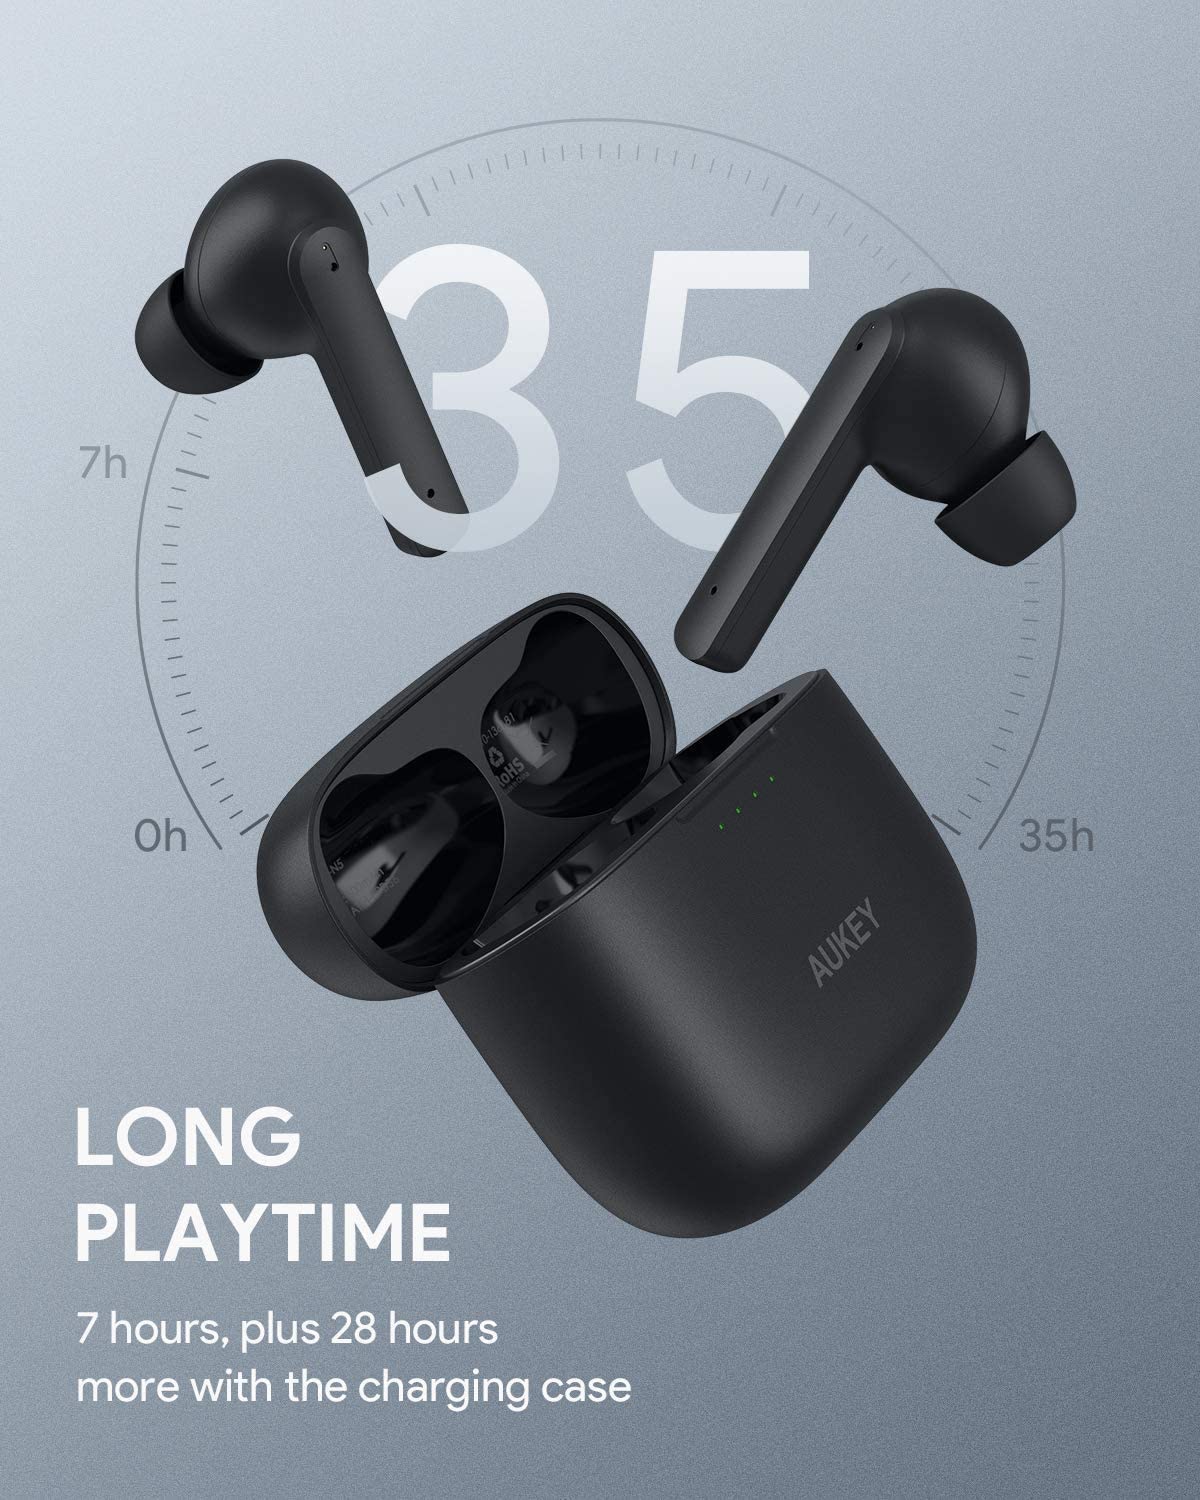 AUKEY True Wireless Earbuds Active Noise Cancelling Bluetooth 5.0 Earphone USB-C